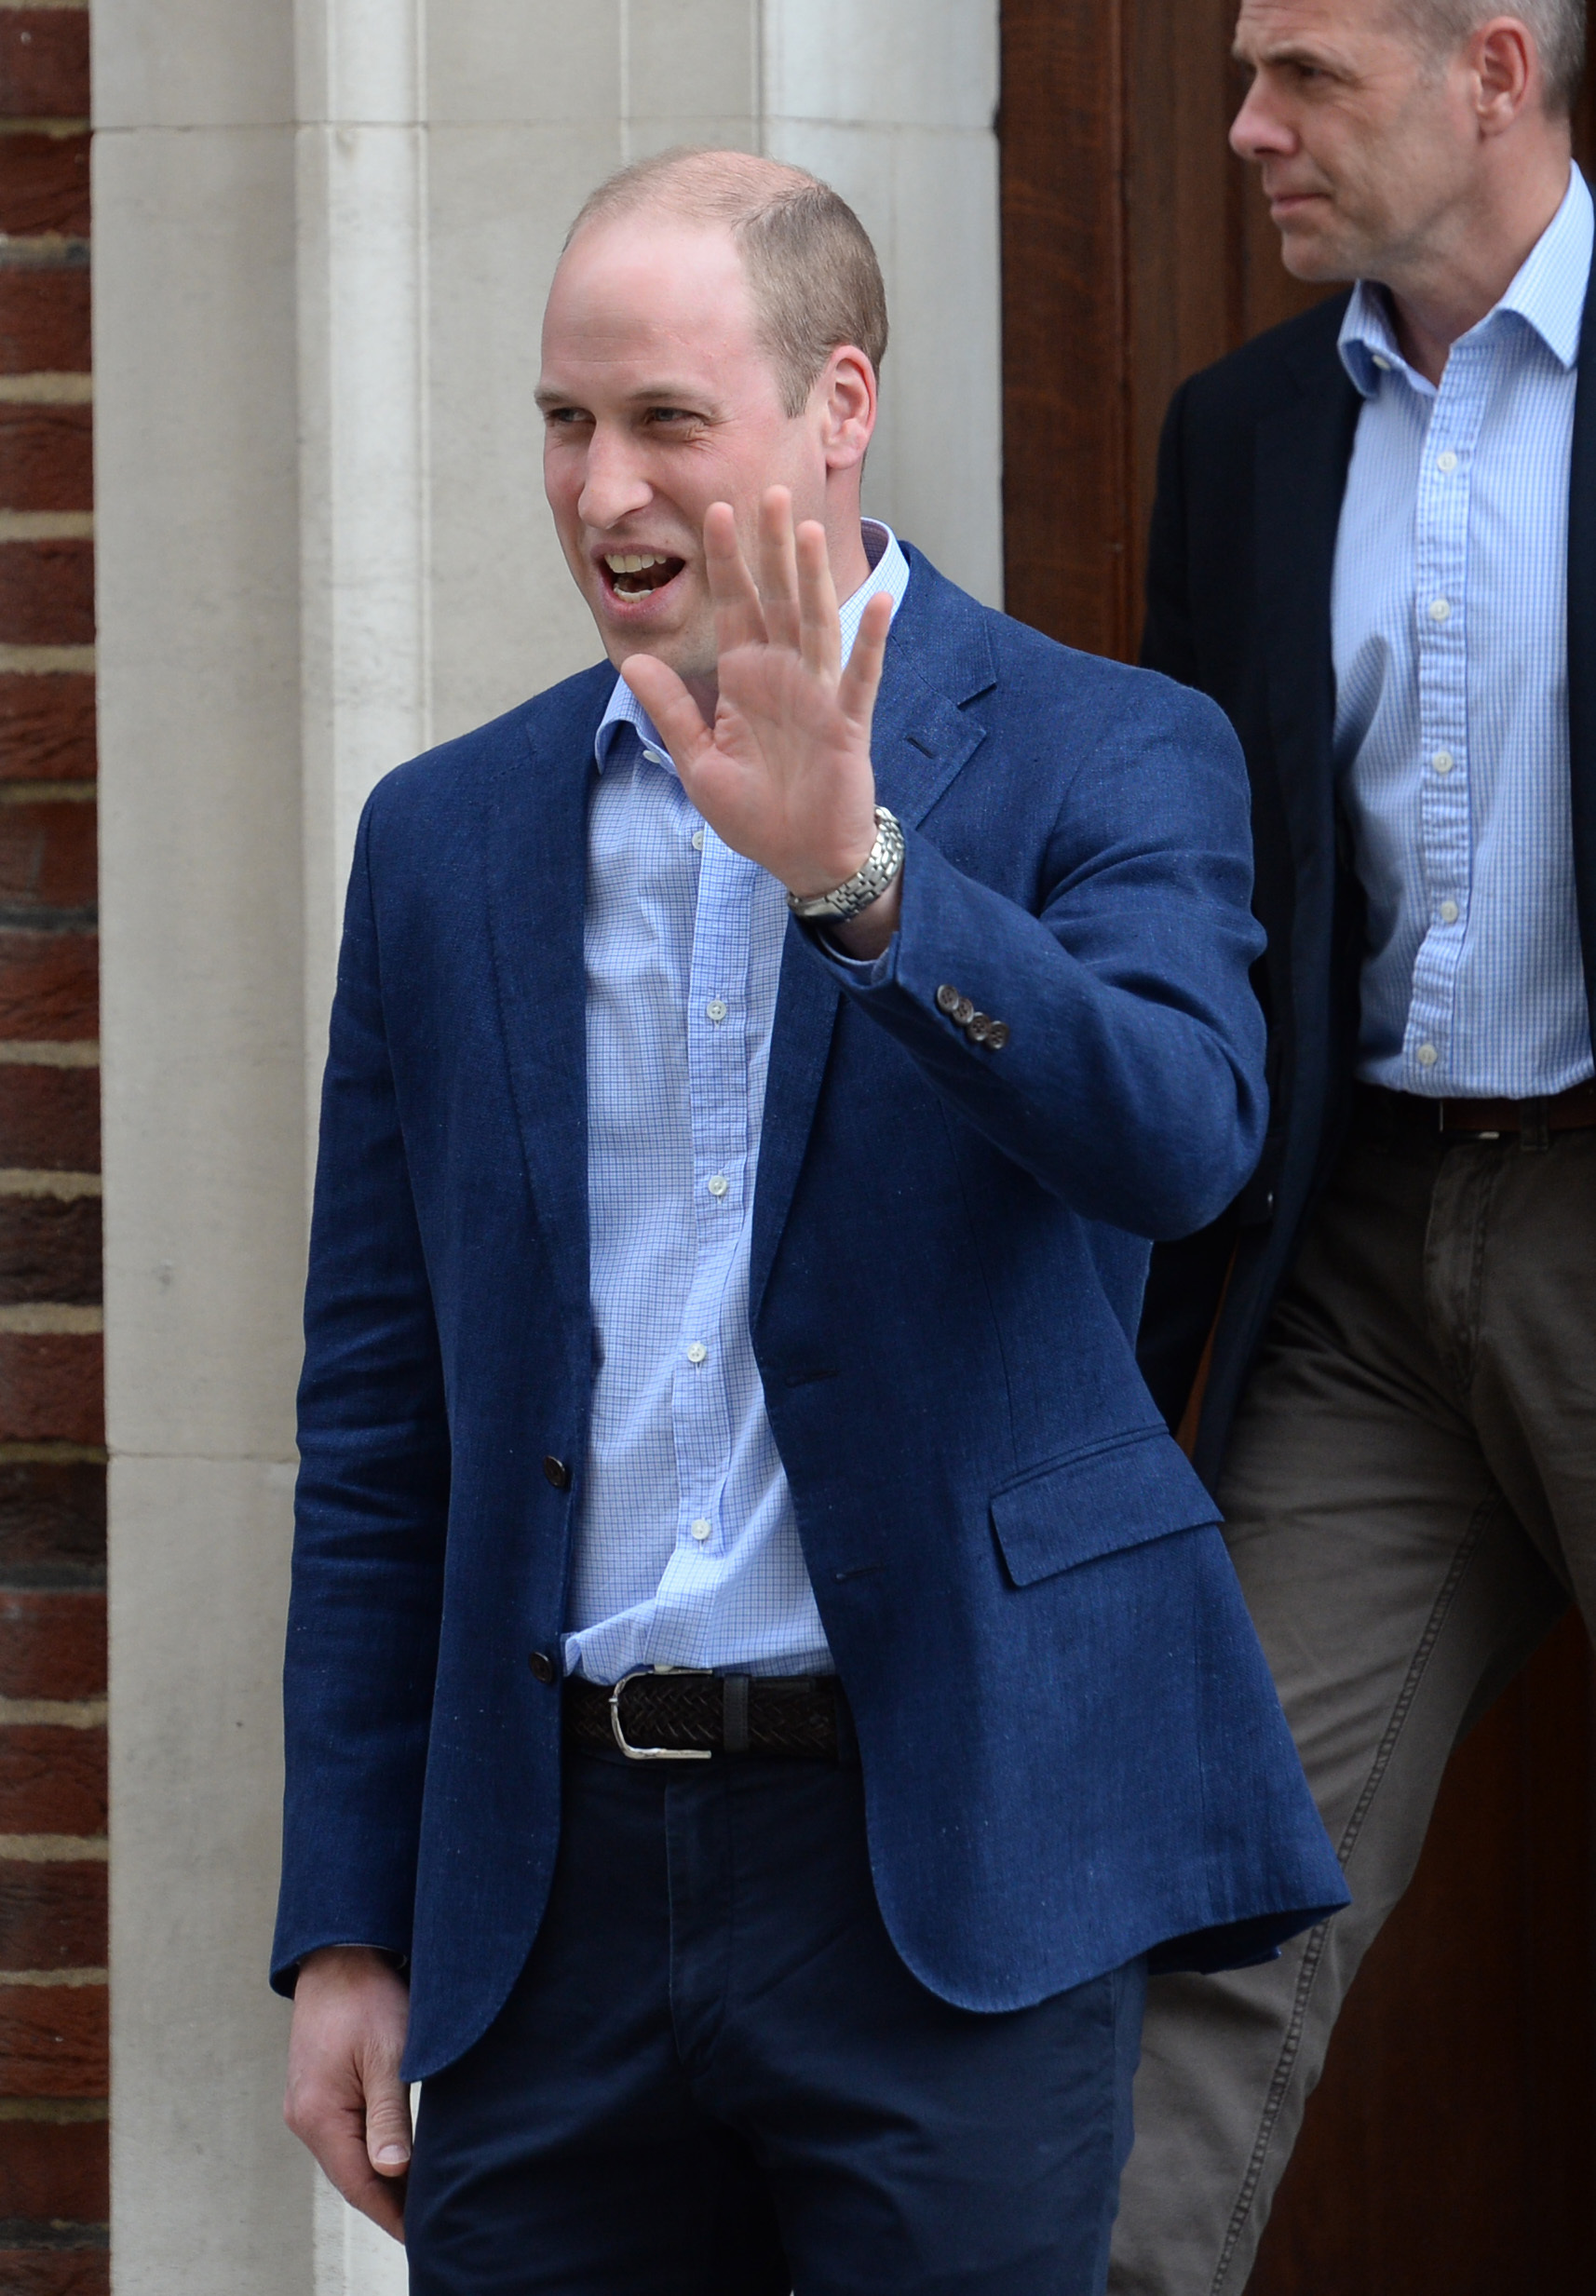 The Duke of Cambridge leaves the Lindo Wing at St Mary's Hospital in Paddington, London